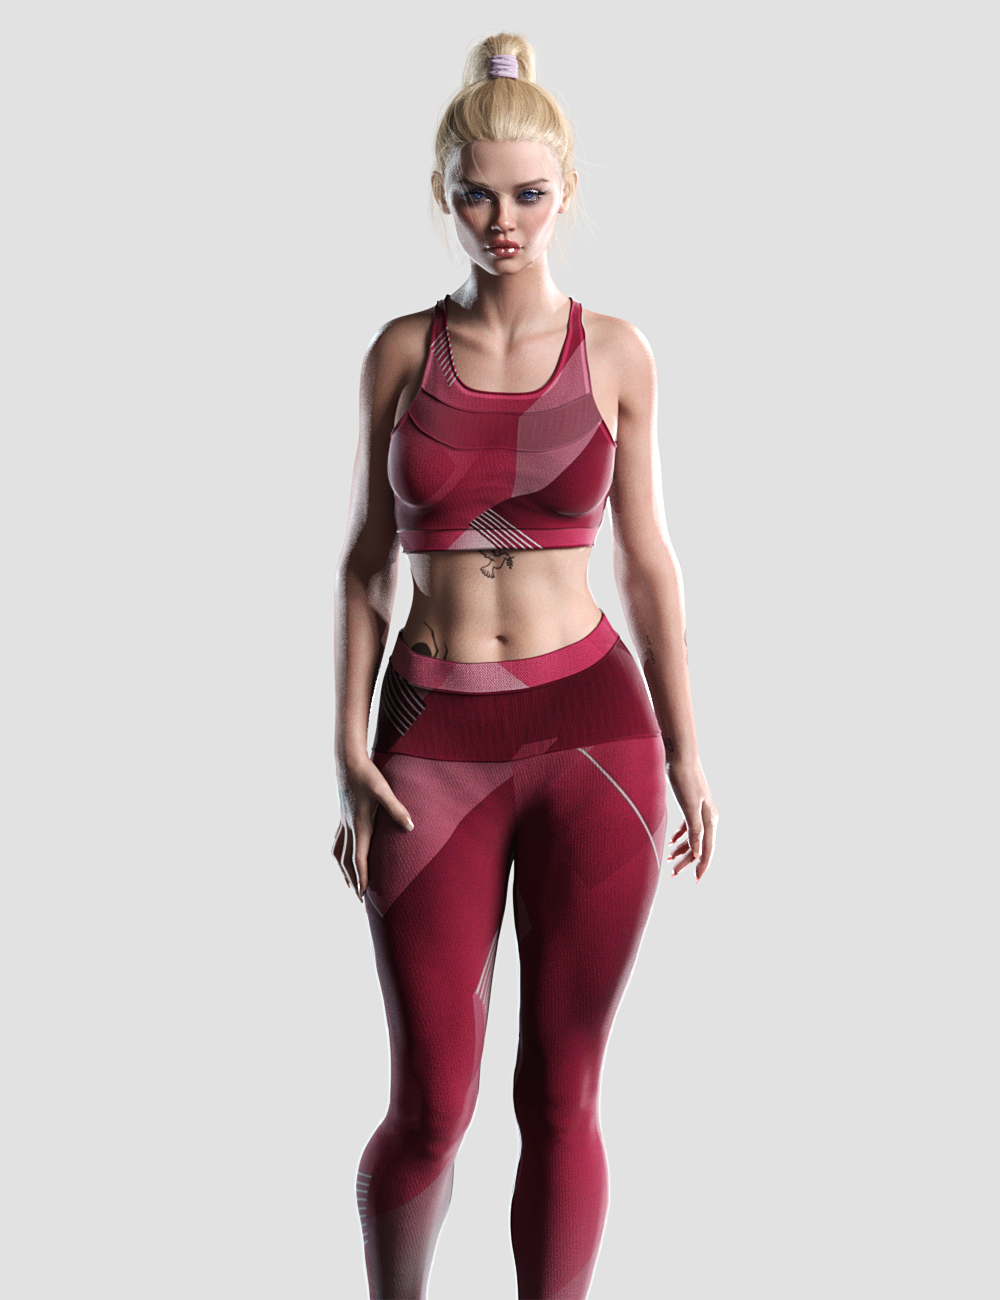 Knit Sports Outfit Textures by: Romeo, 3D Models by Daz 3D